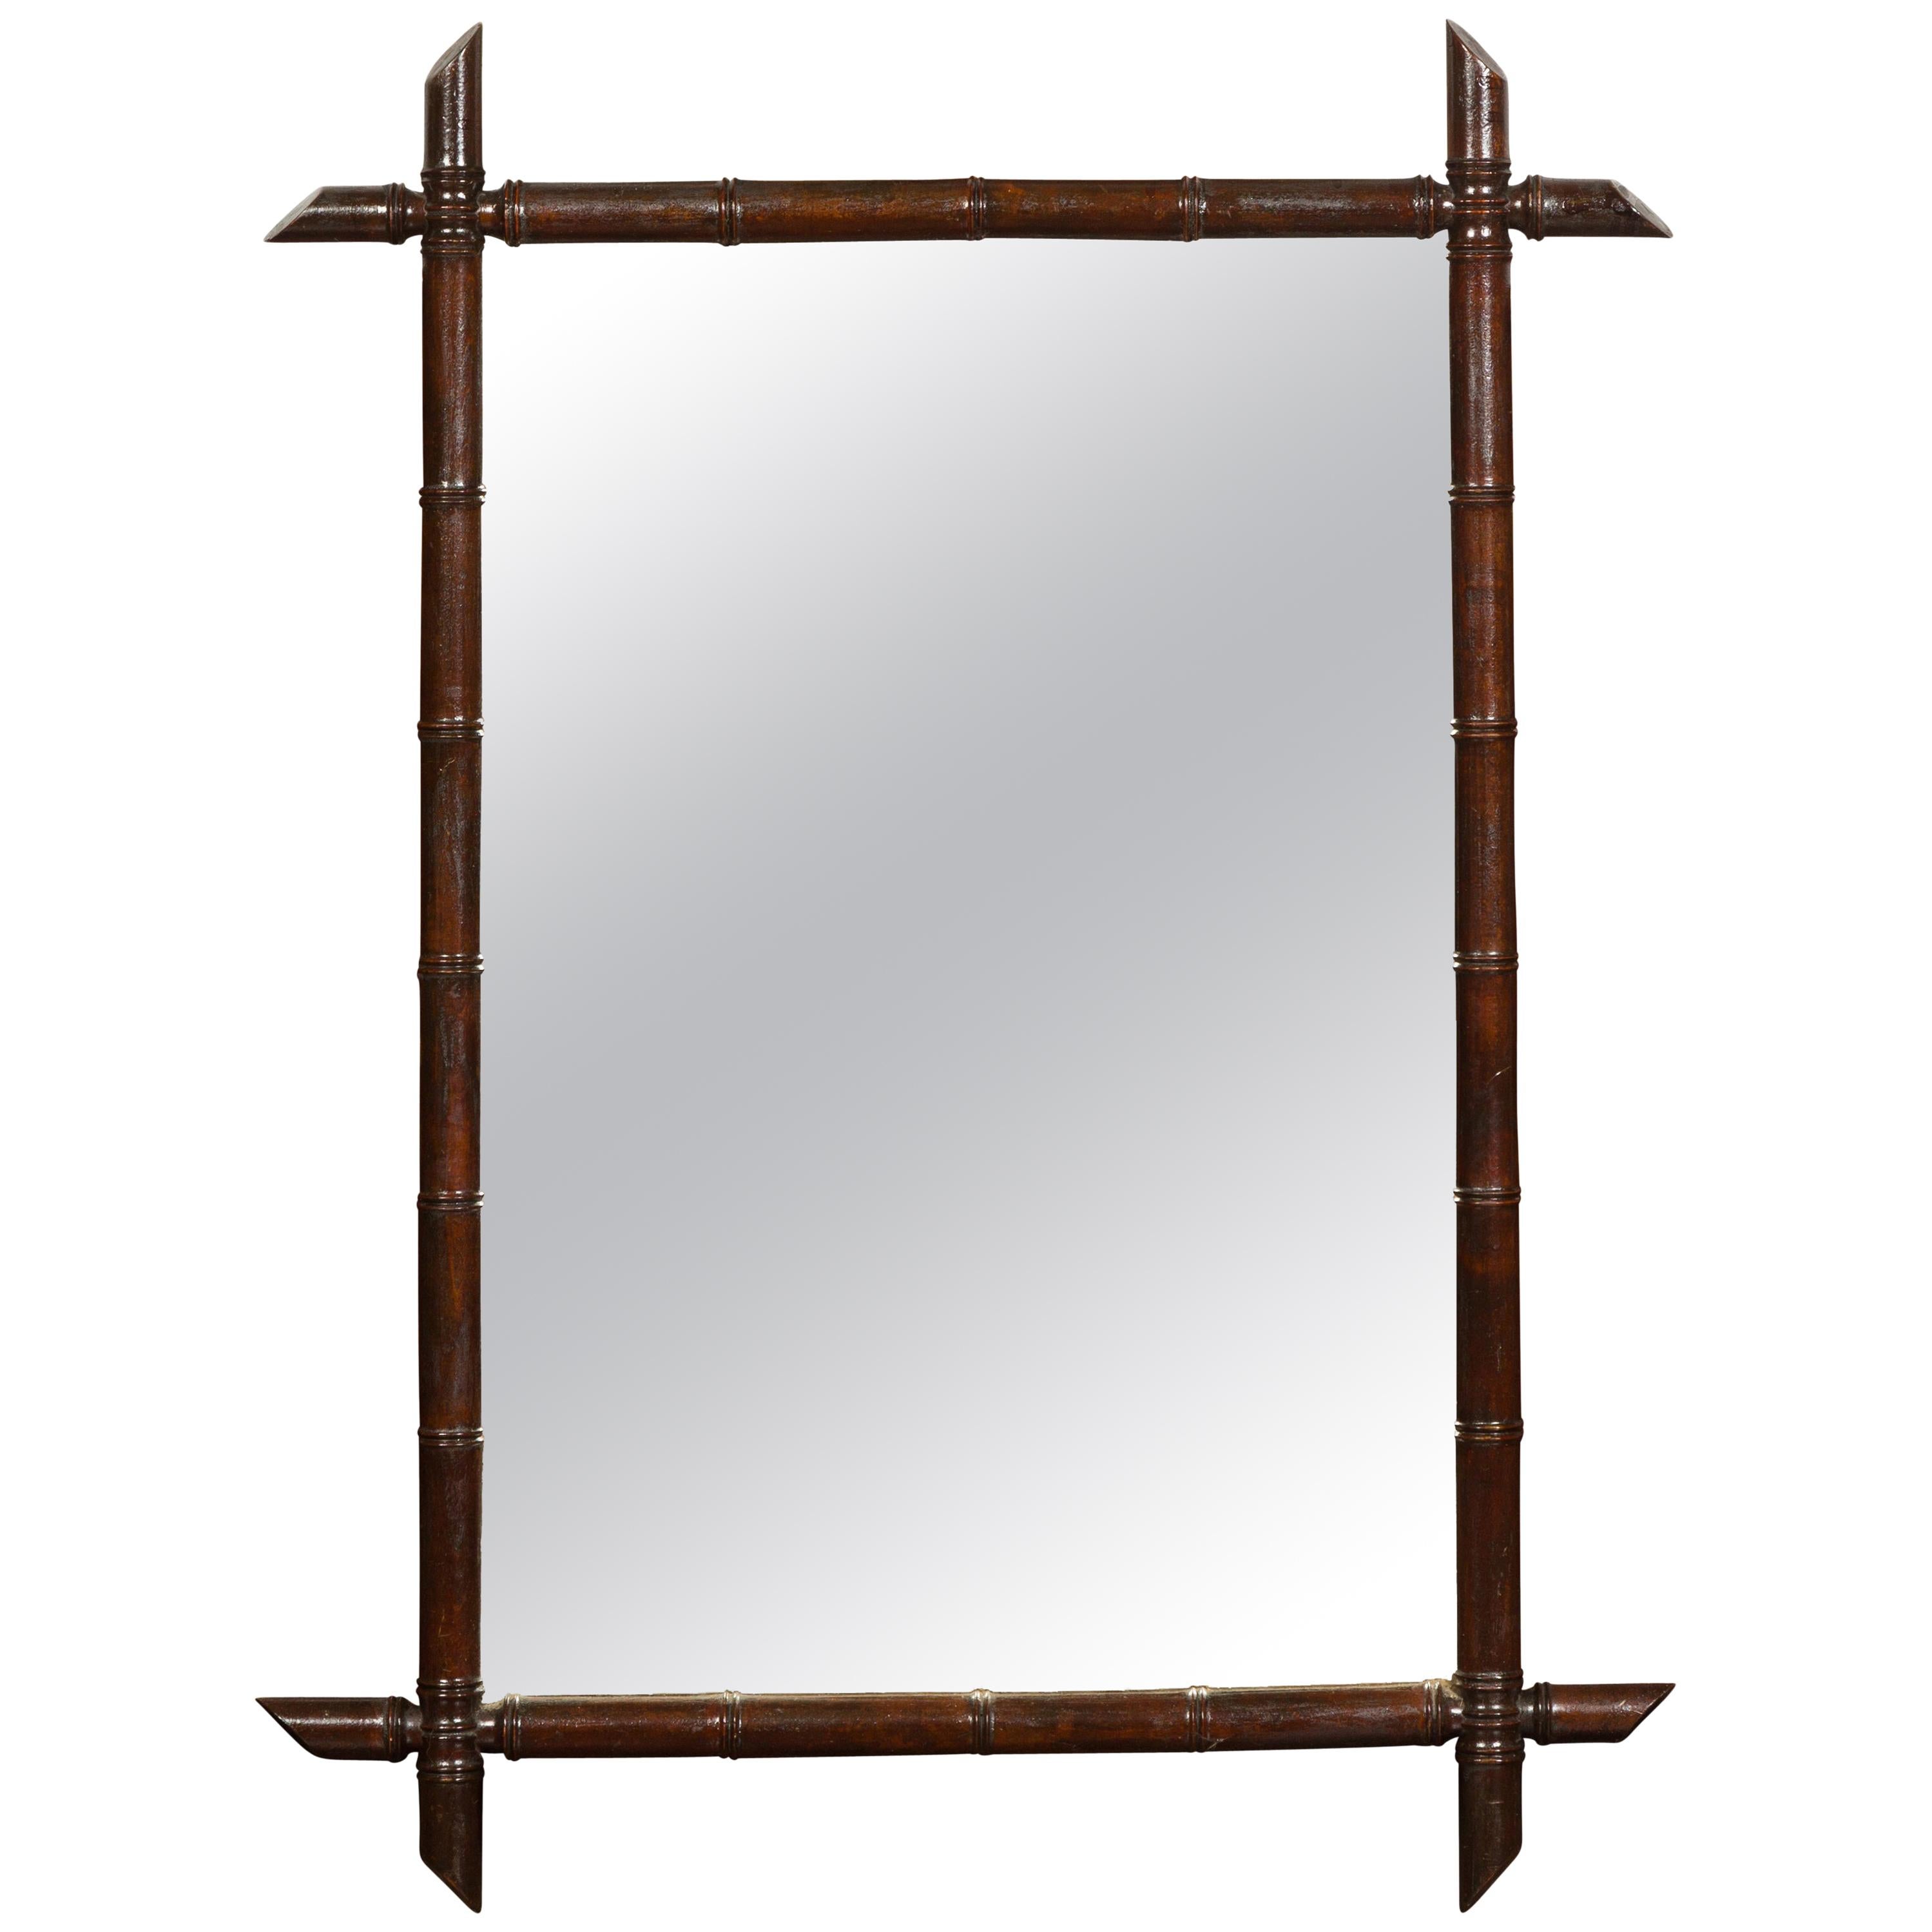 French Turn of the Century Faux Bamboo Mirror with Dark Brown Patina, circa 1900